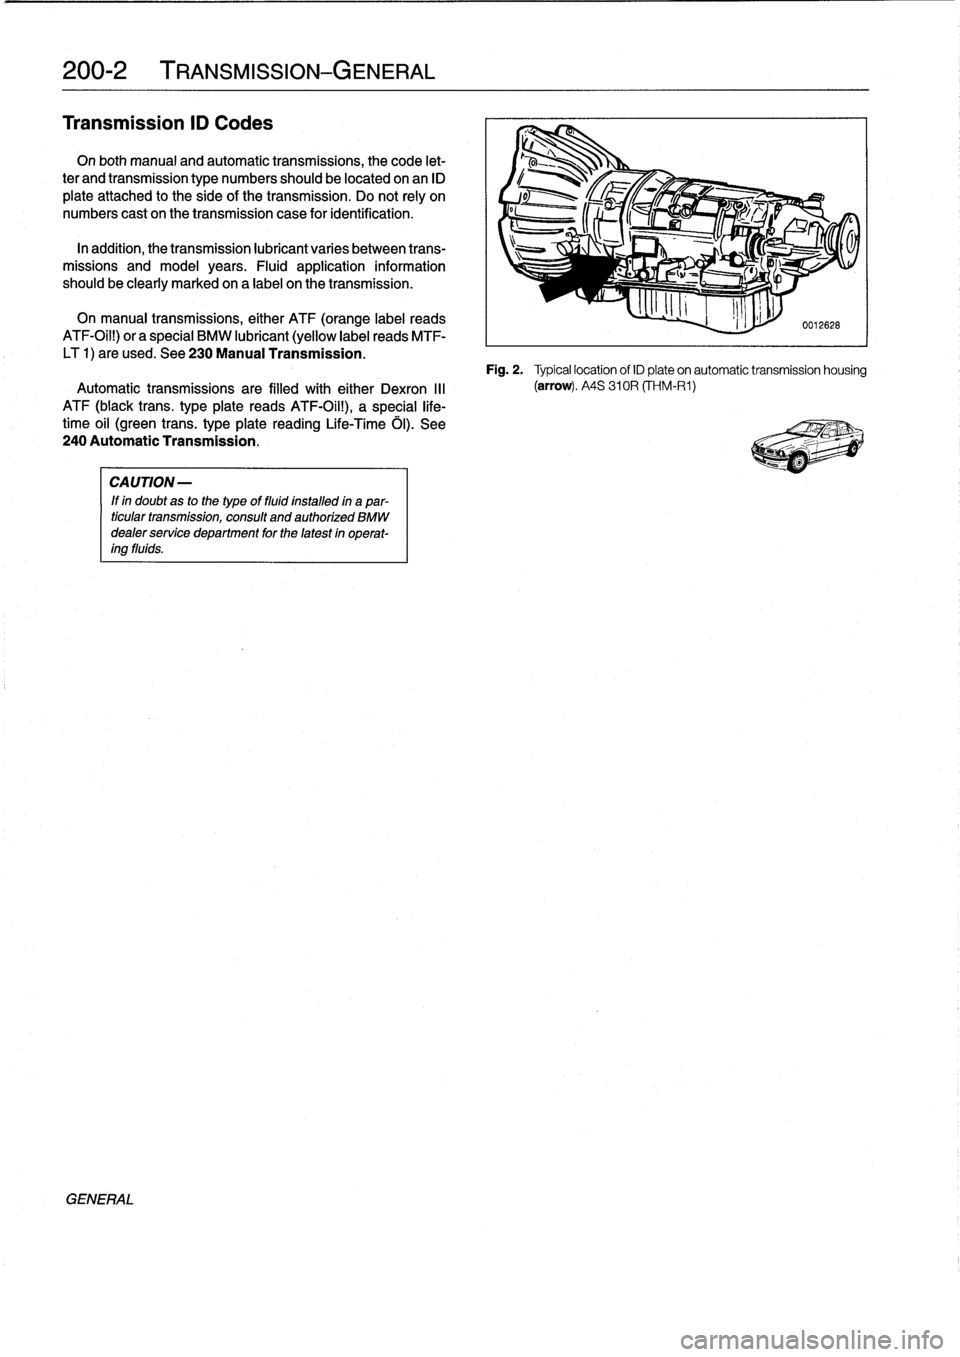 BMW 325i 1993 E36 Owners Guide 
200-2
TRANSMISSION-GENERAL

Transmission
ID
Codes

On
both
manual
and
automatic
transmissions,
the
code
let-

ter
and
transmission
type
numbers
should
be
located
onan
ID

plate
attached
to
the
síde
